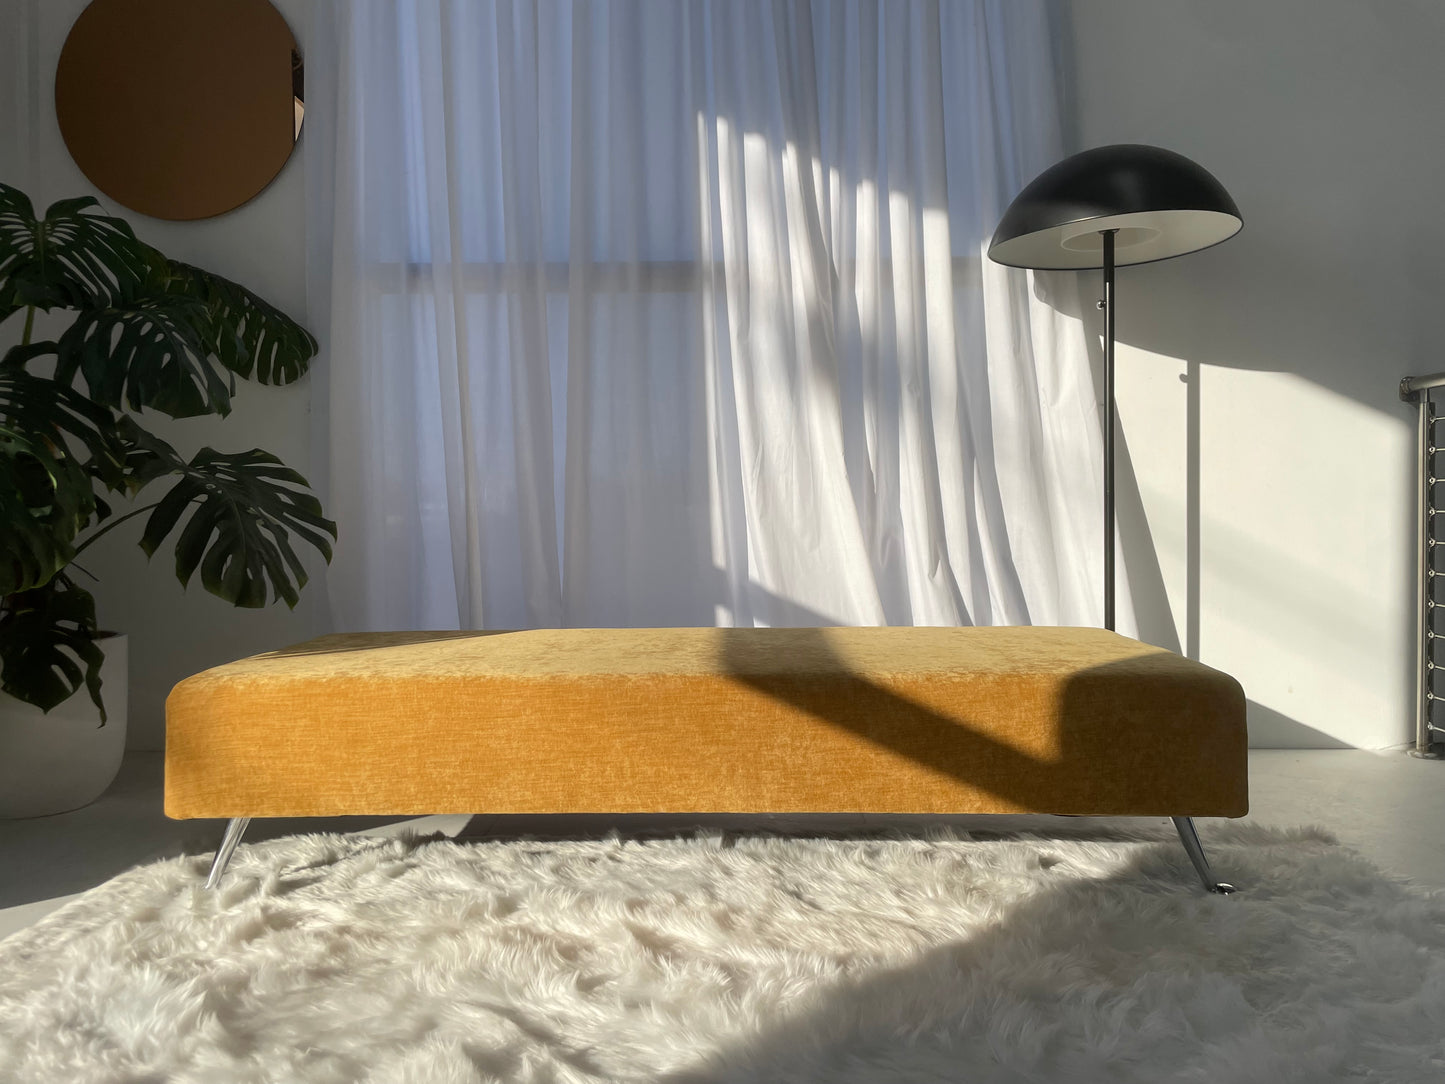 Large Mustard Daybed